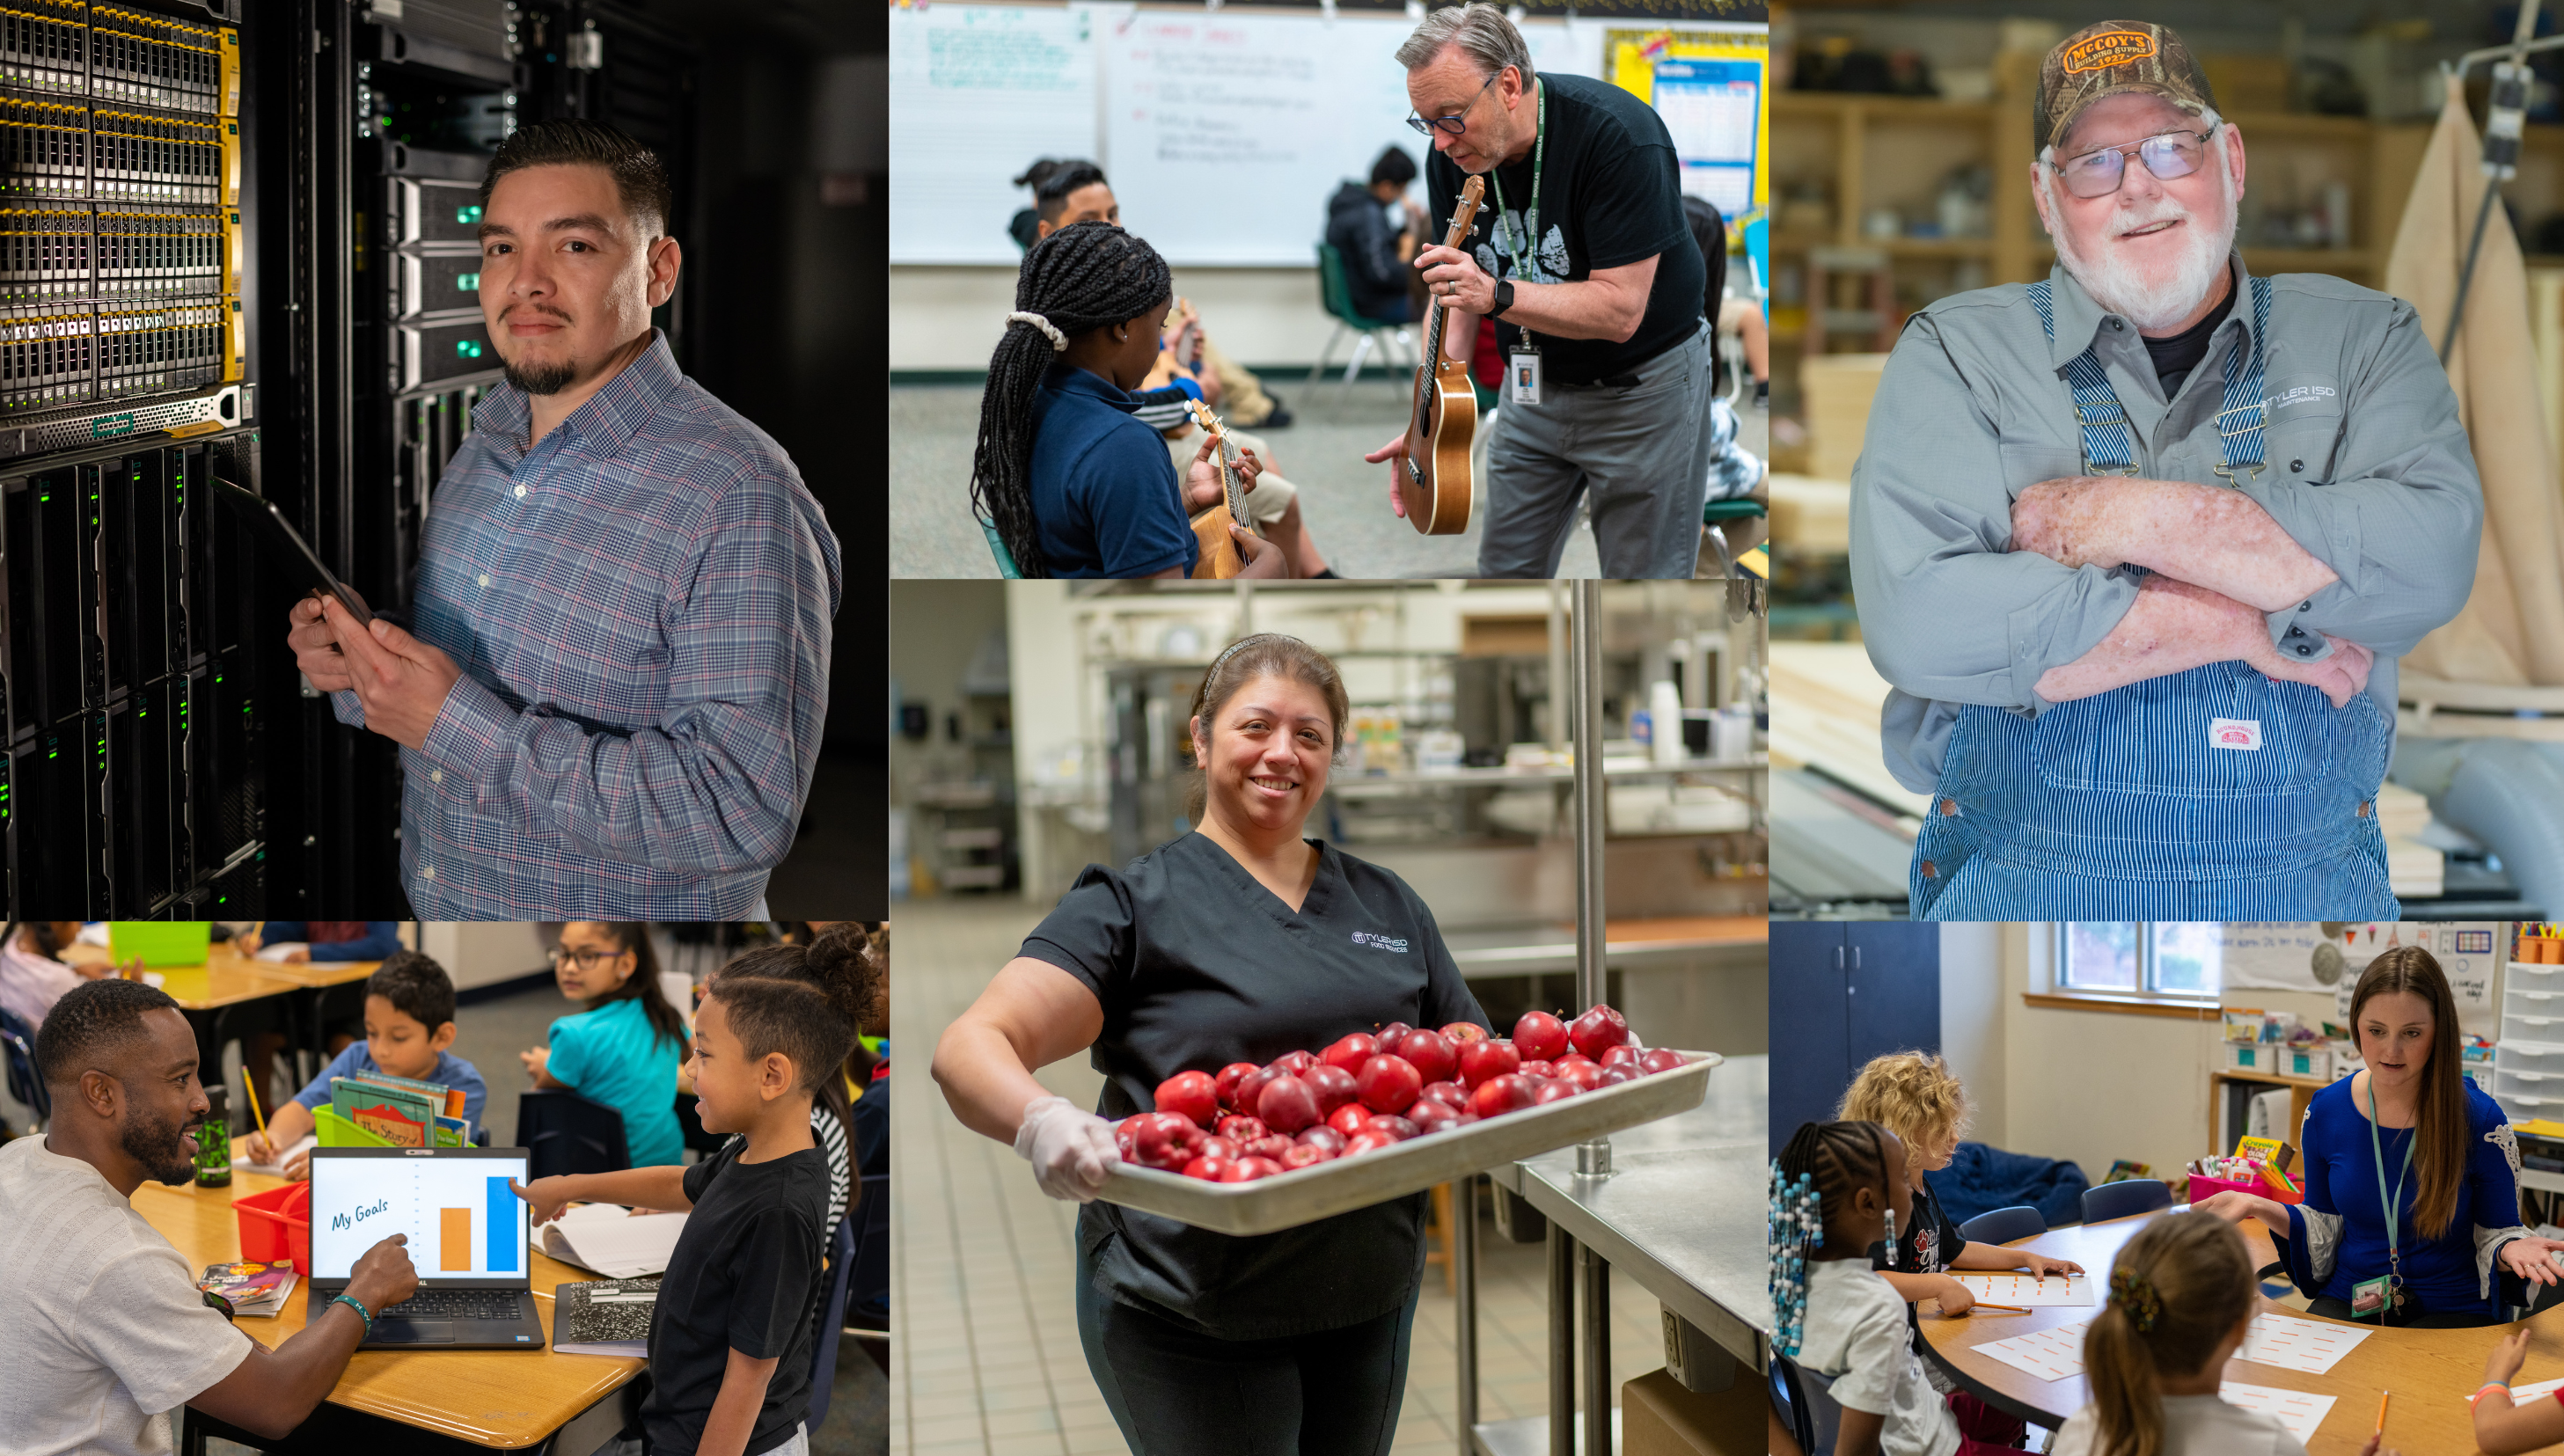 montage of photos - man standing next to network server, woman holding pan of red apples, teachers in classrooms with students